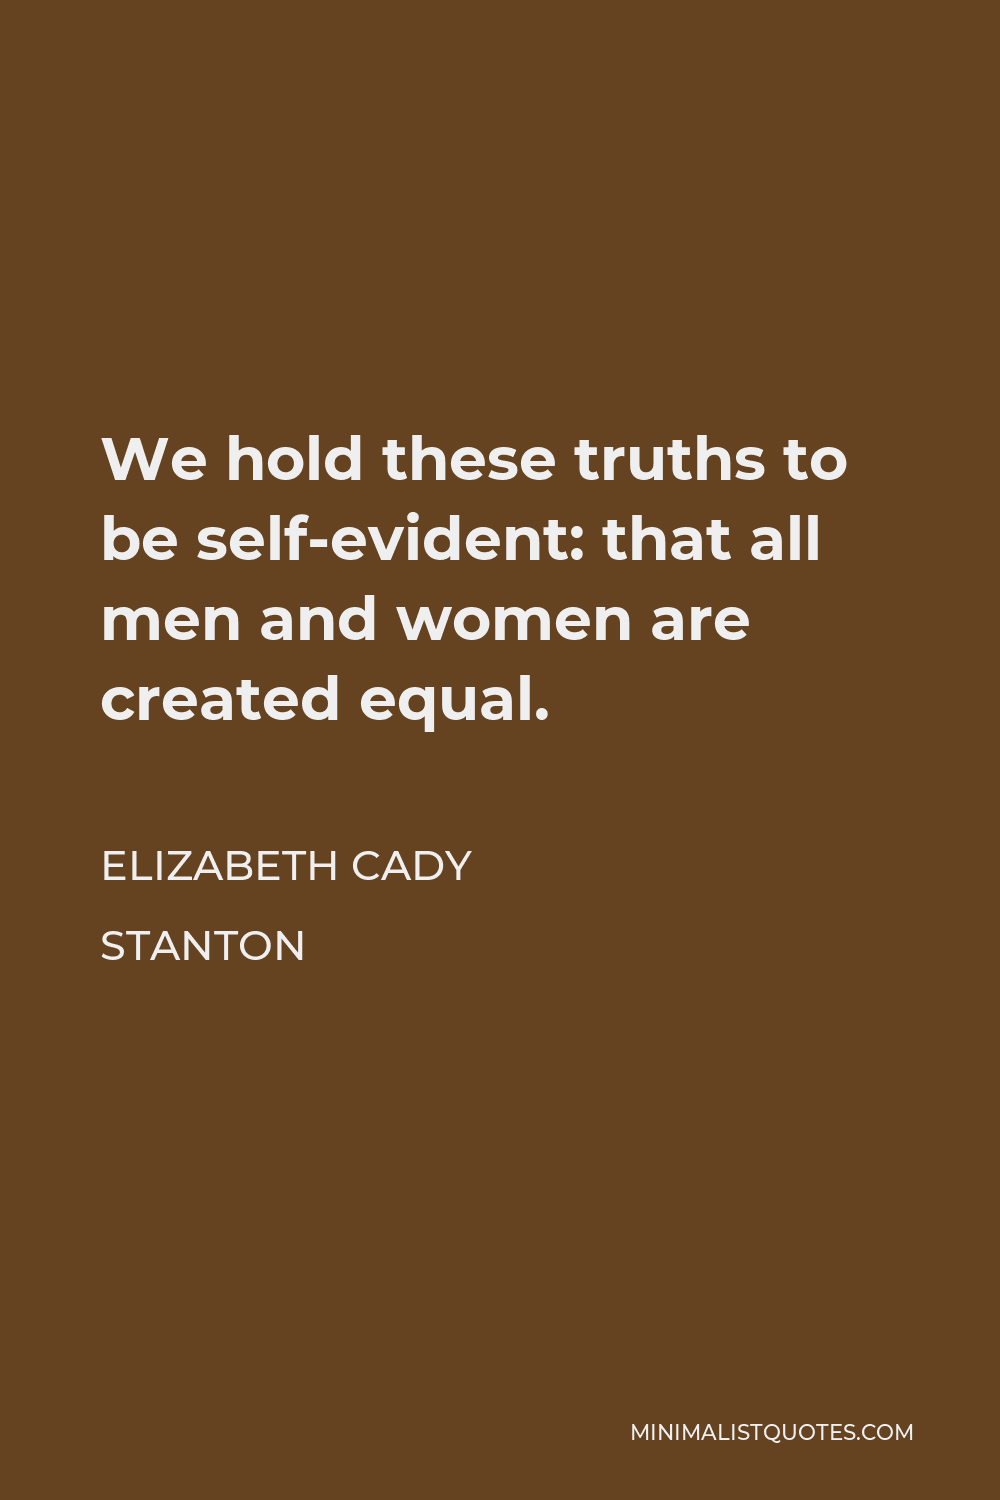 Elizabeth Cady Stanton Quote - We hold these truths to be self-evident: that all men and women are created equal.